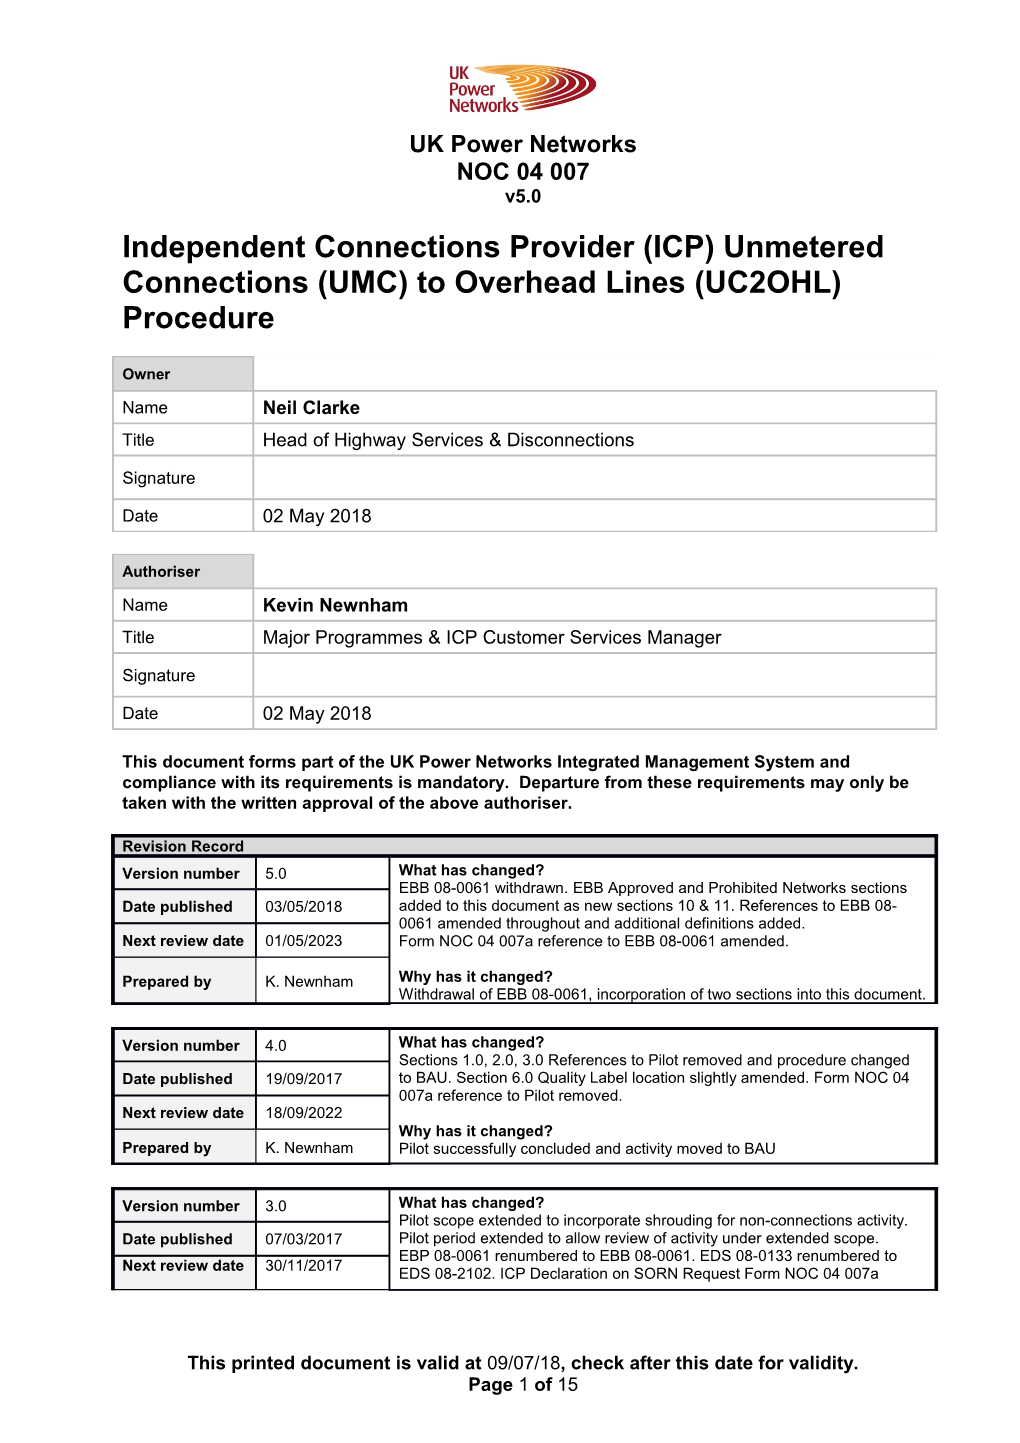 NOC 04 007 Independent Connections Provider (ICP) Unmetered Connections (UMC) to Overhead s1